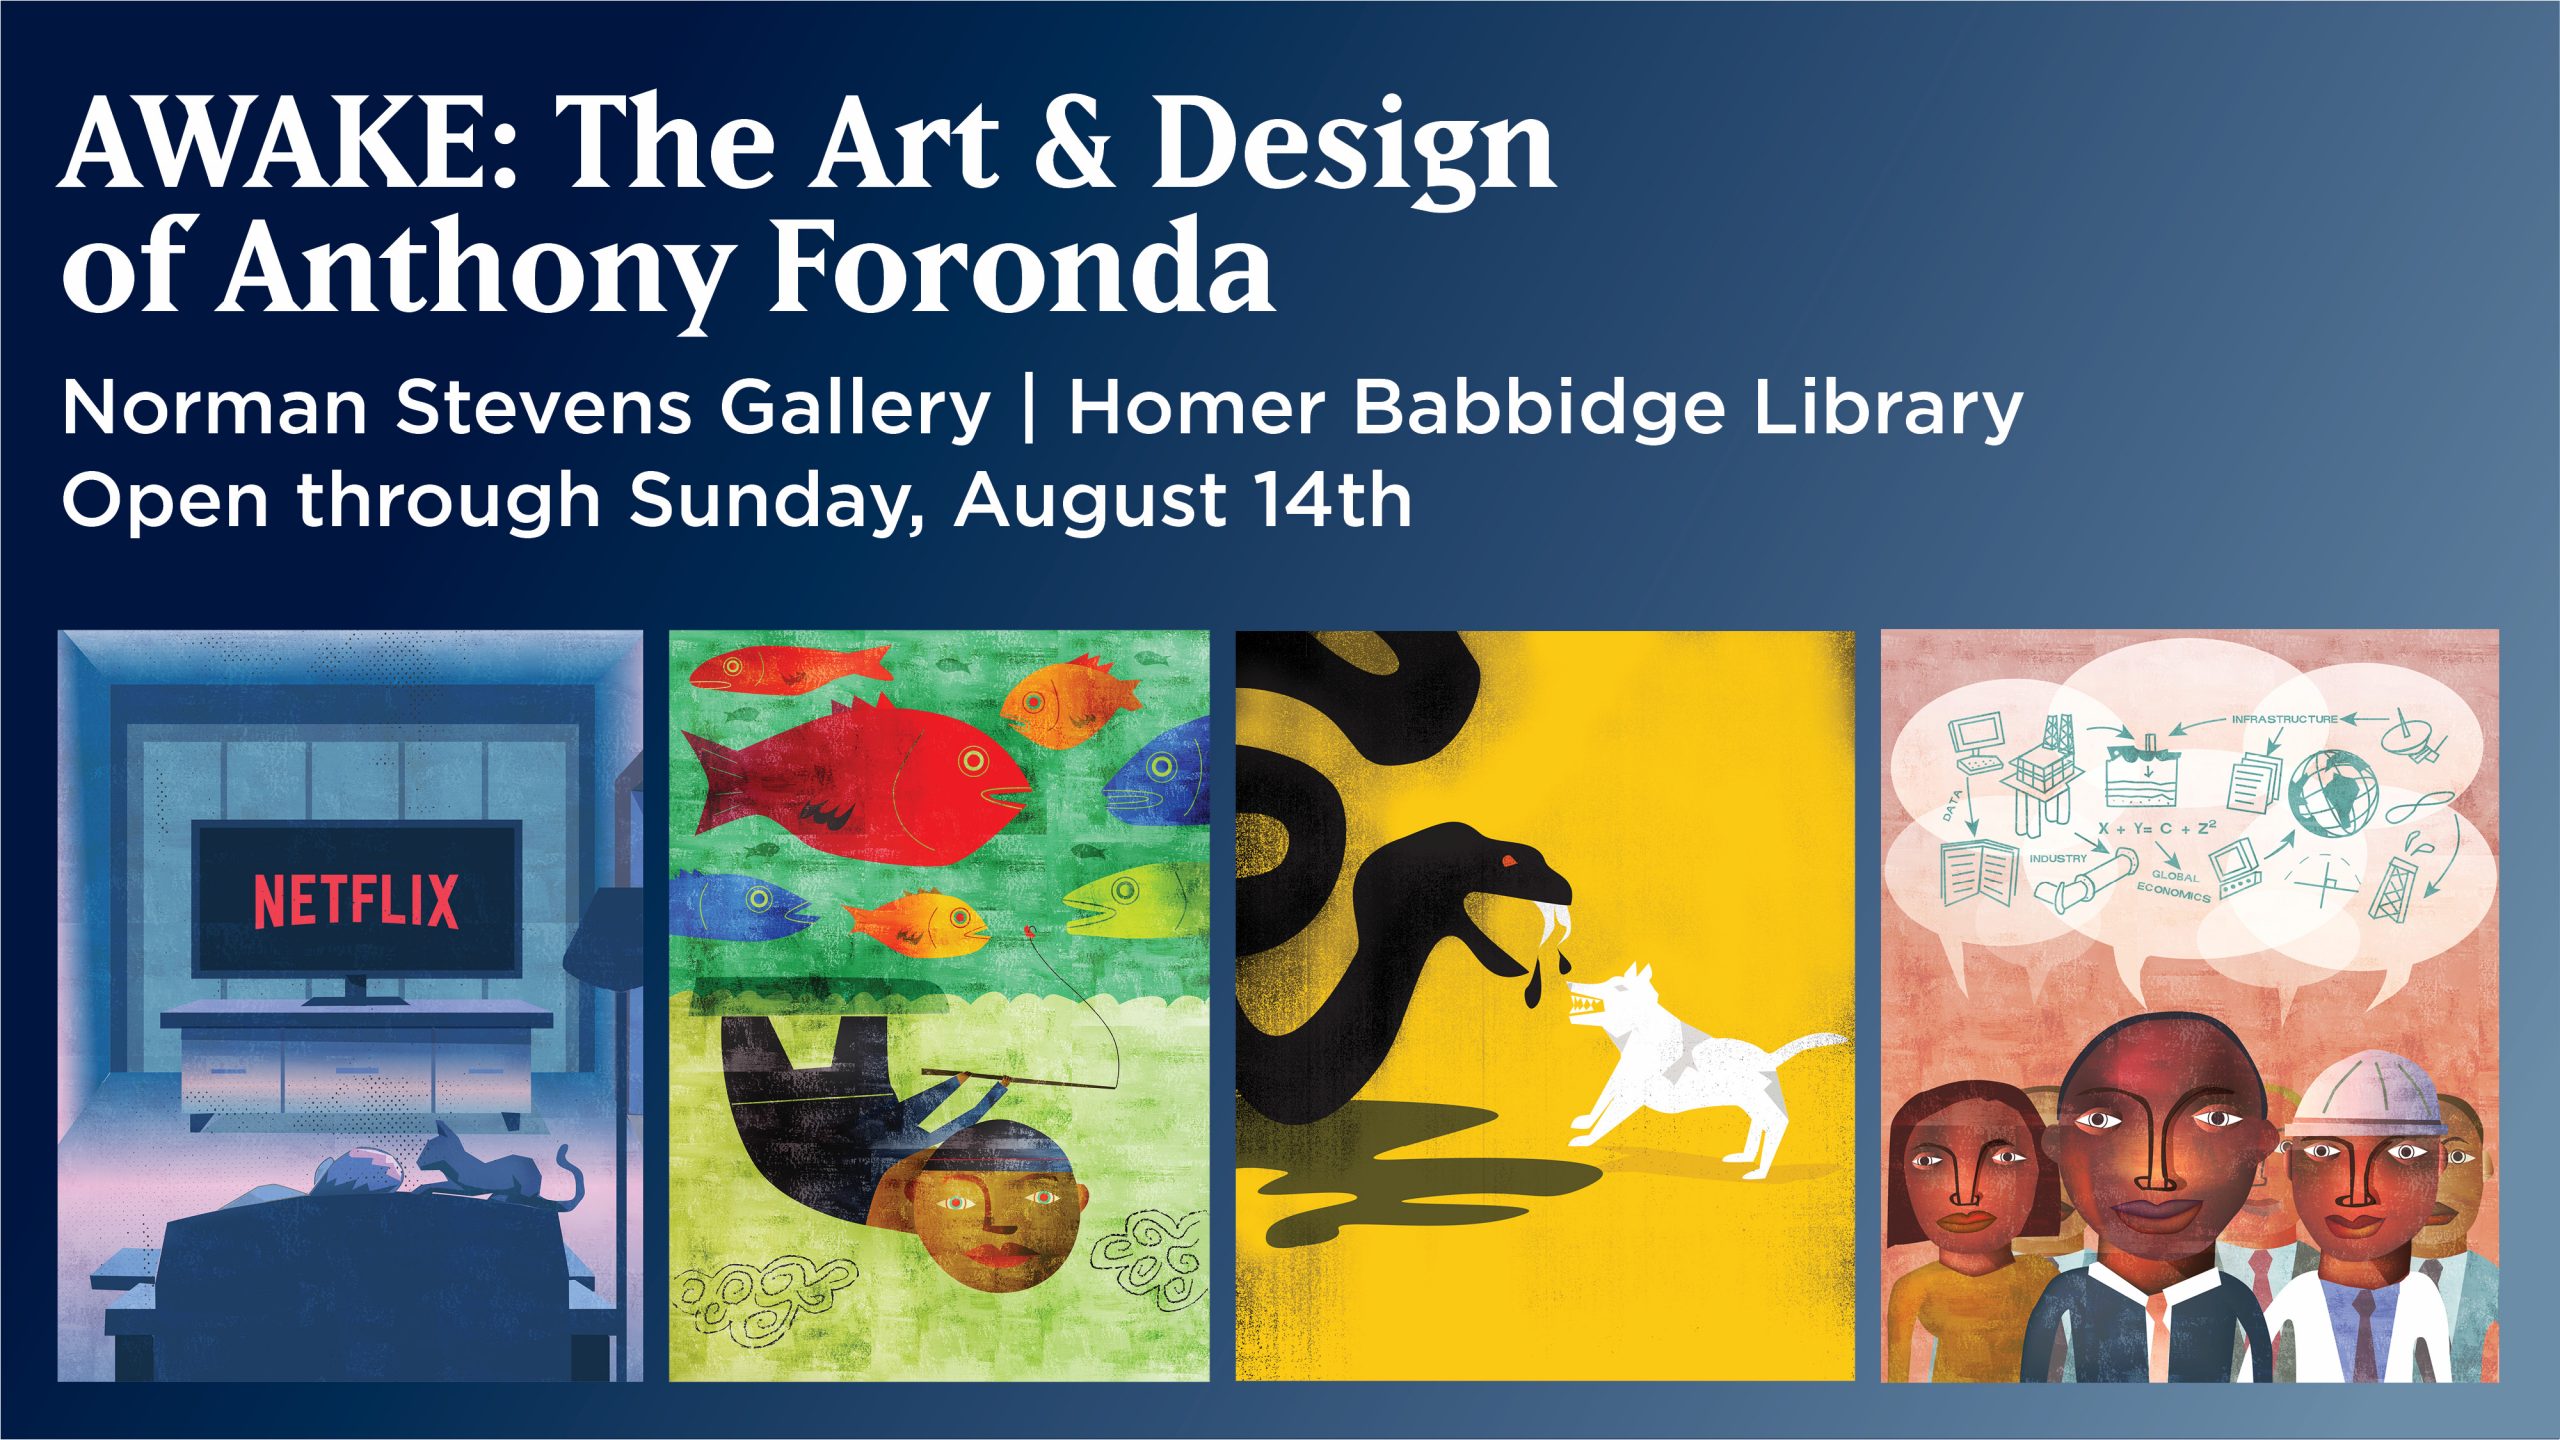 Four Images of colorful illustrations by Anthony Foronda, with the text: AWAKE: The Art & Design of Anthony Foronda - Norman Stevens Gallery | Homer Babbidge Library | Open through Sunday, August 14, 2022 lib.uconn.edu/about/exhibits